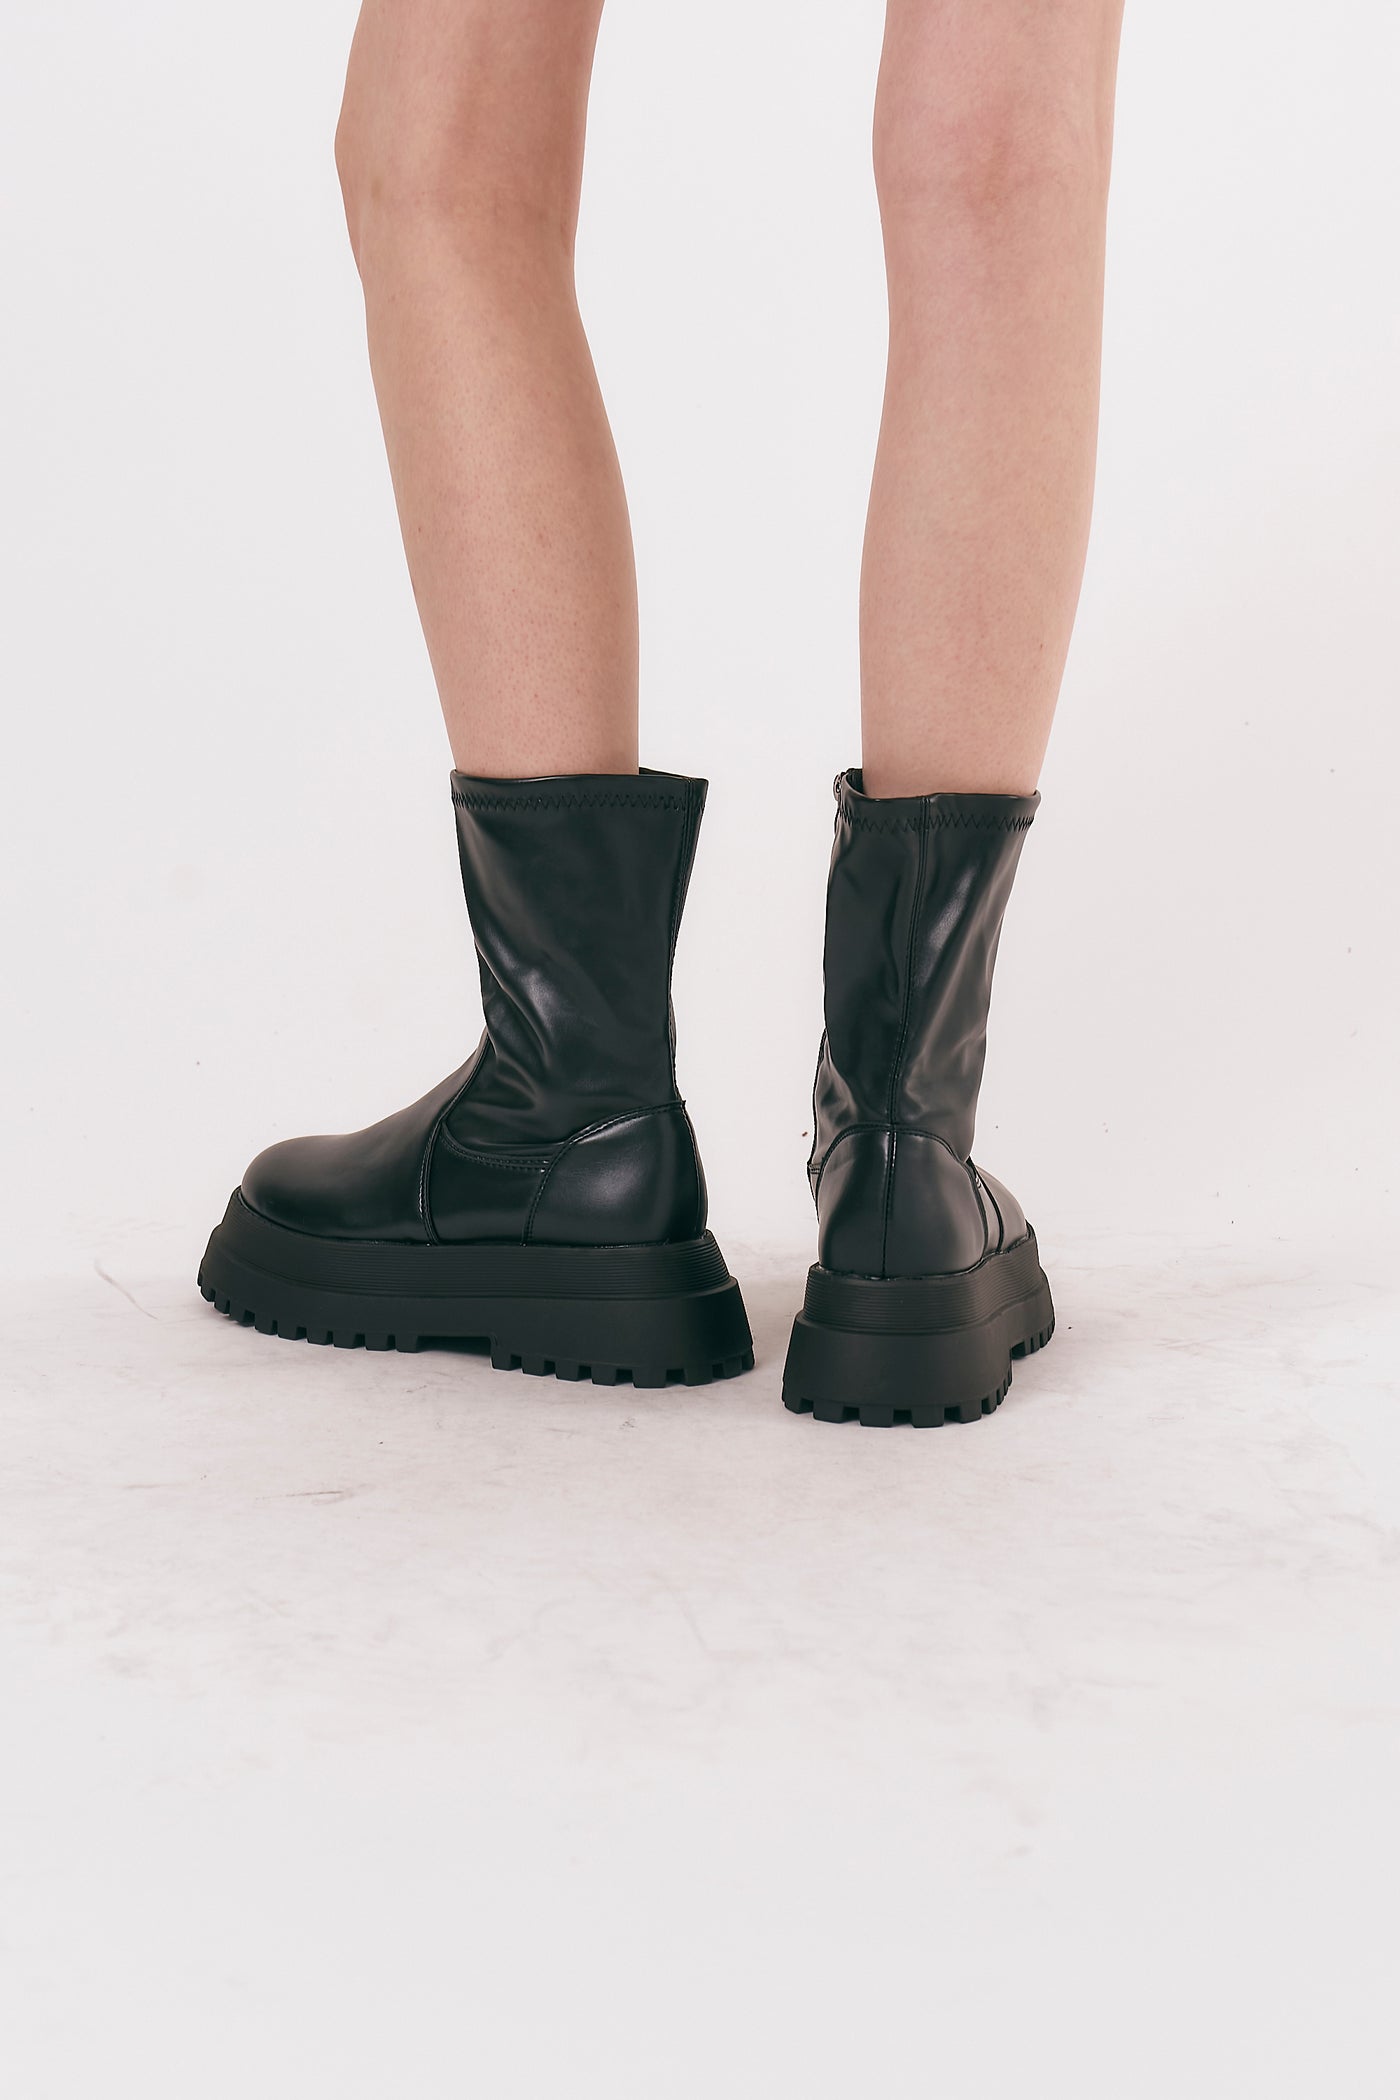 storets.com Andy Chunky Calf Boots